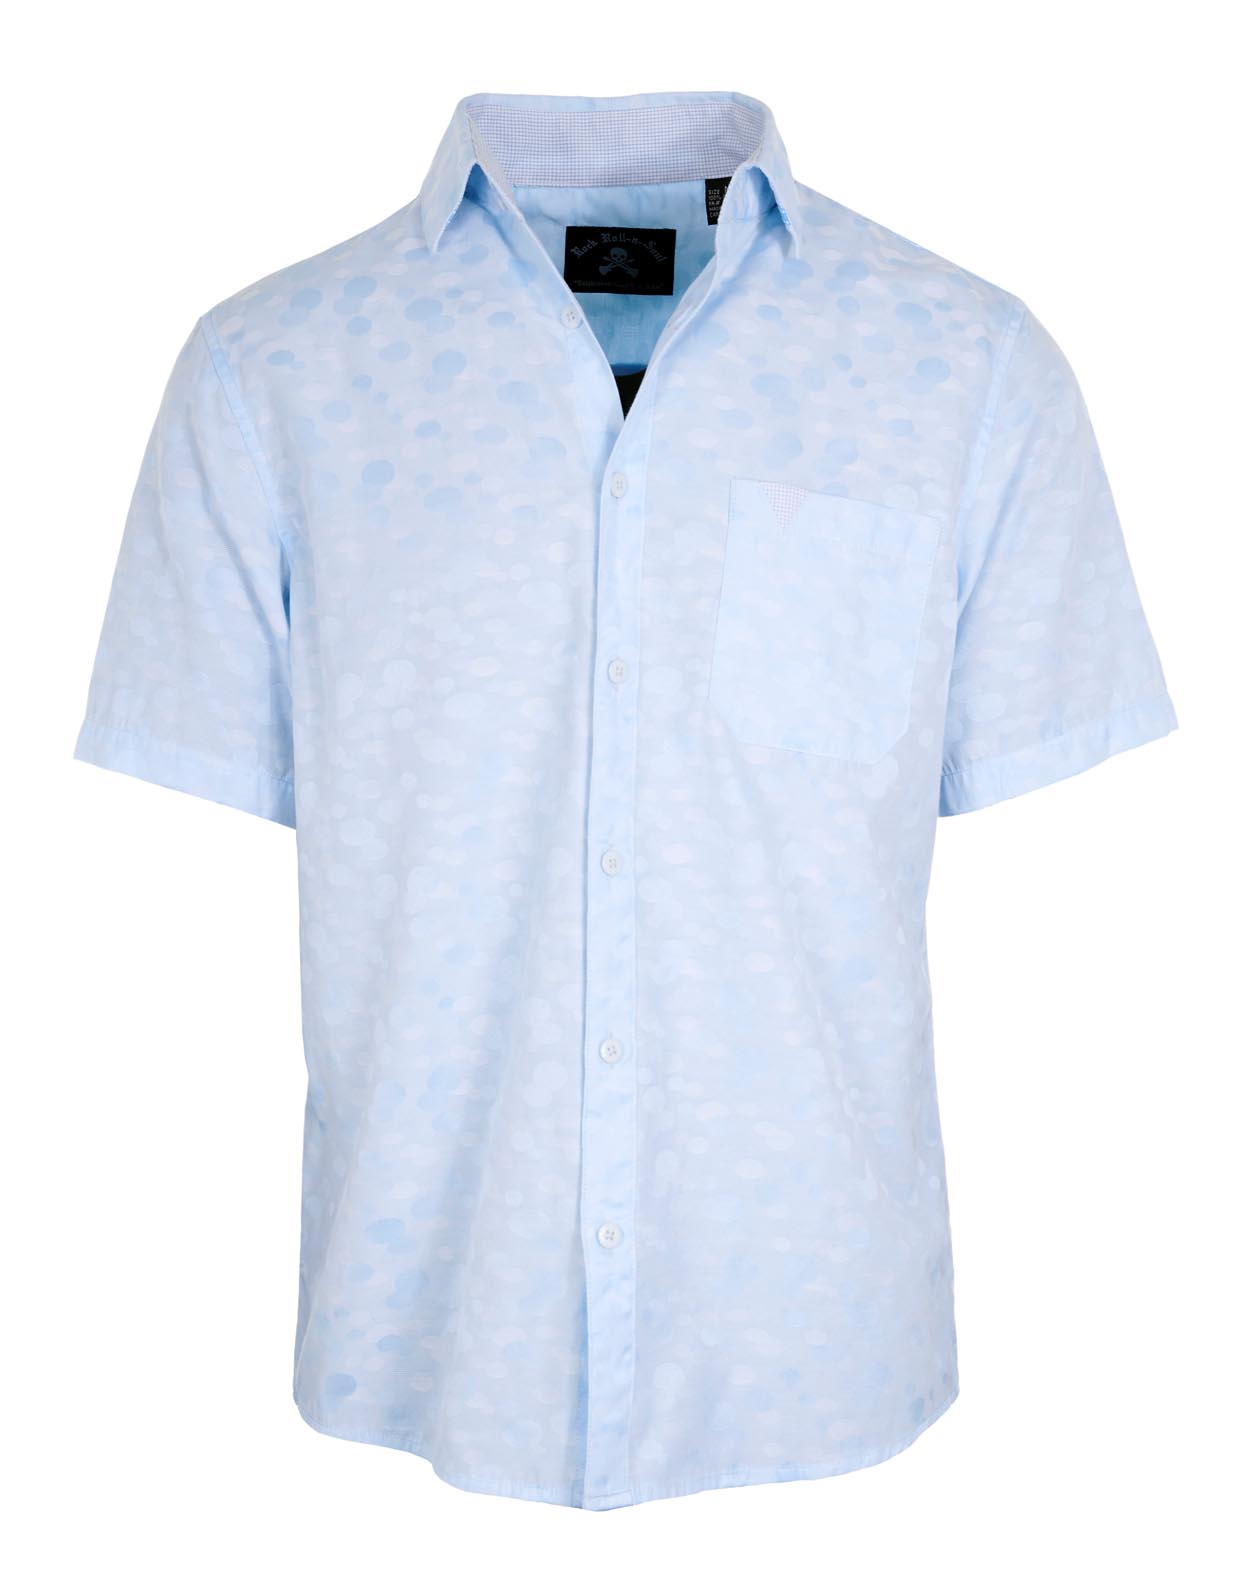 S/S Fashion Button up Shirt | Die Young in Blue by Rock Roll n Soul